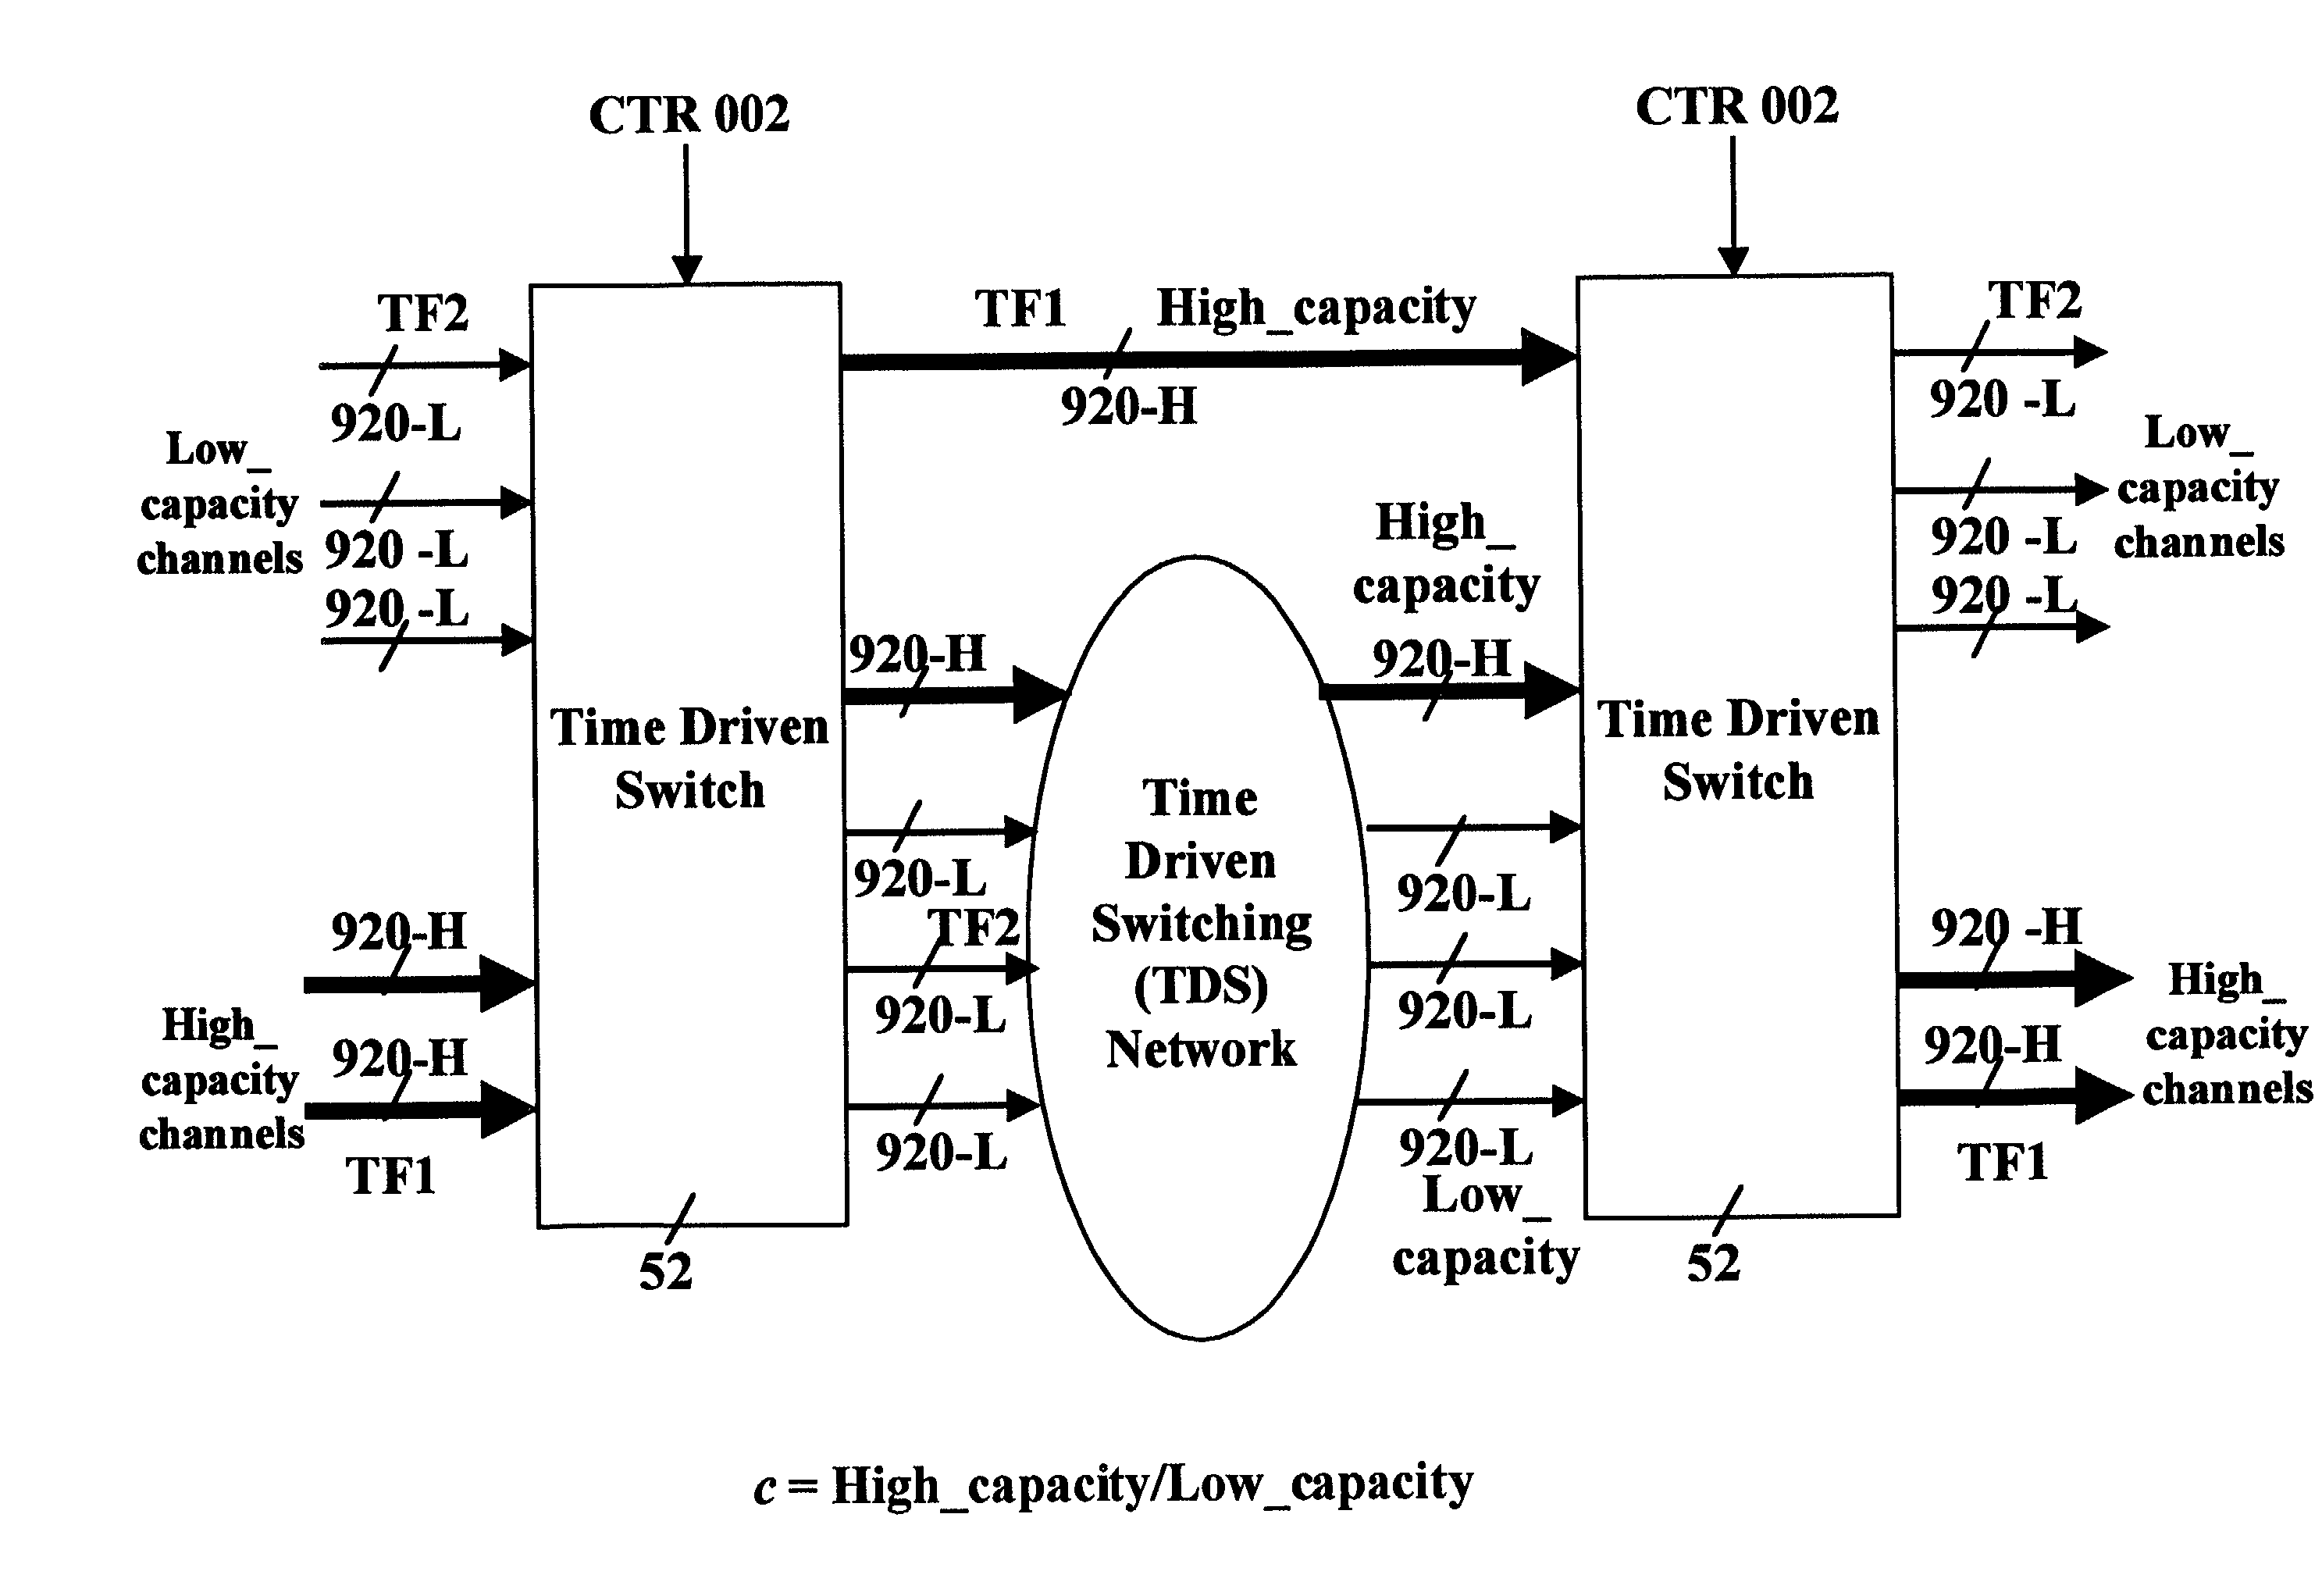 Multi-terabit SONET switching with common time reference